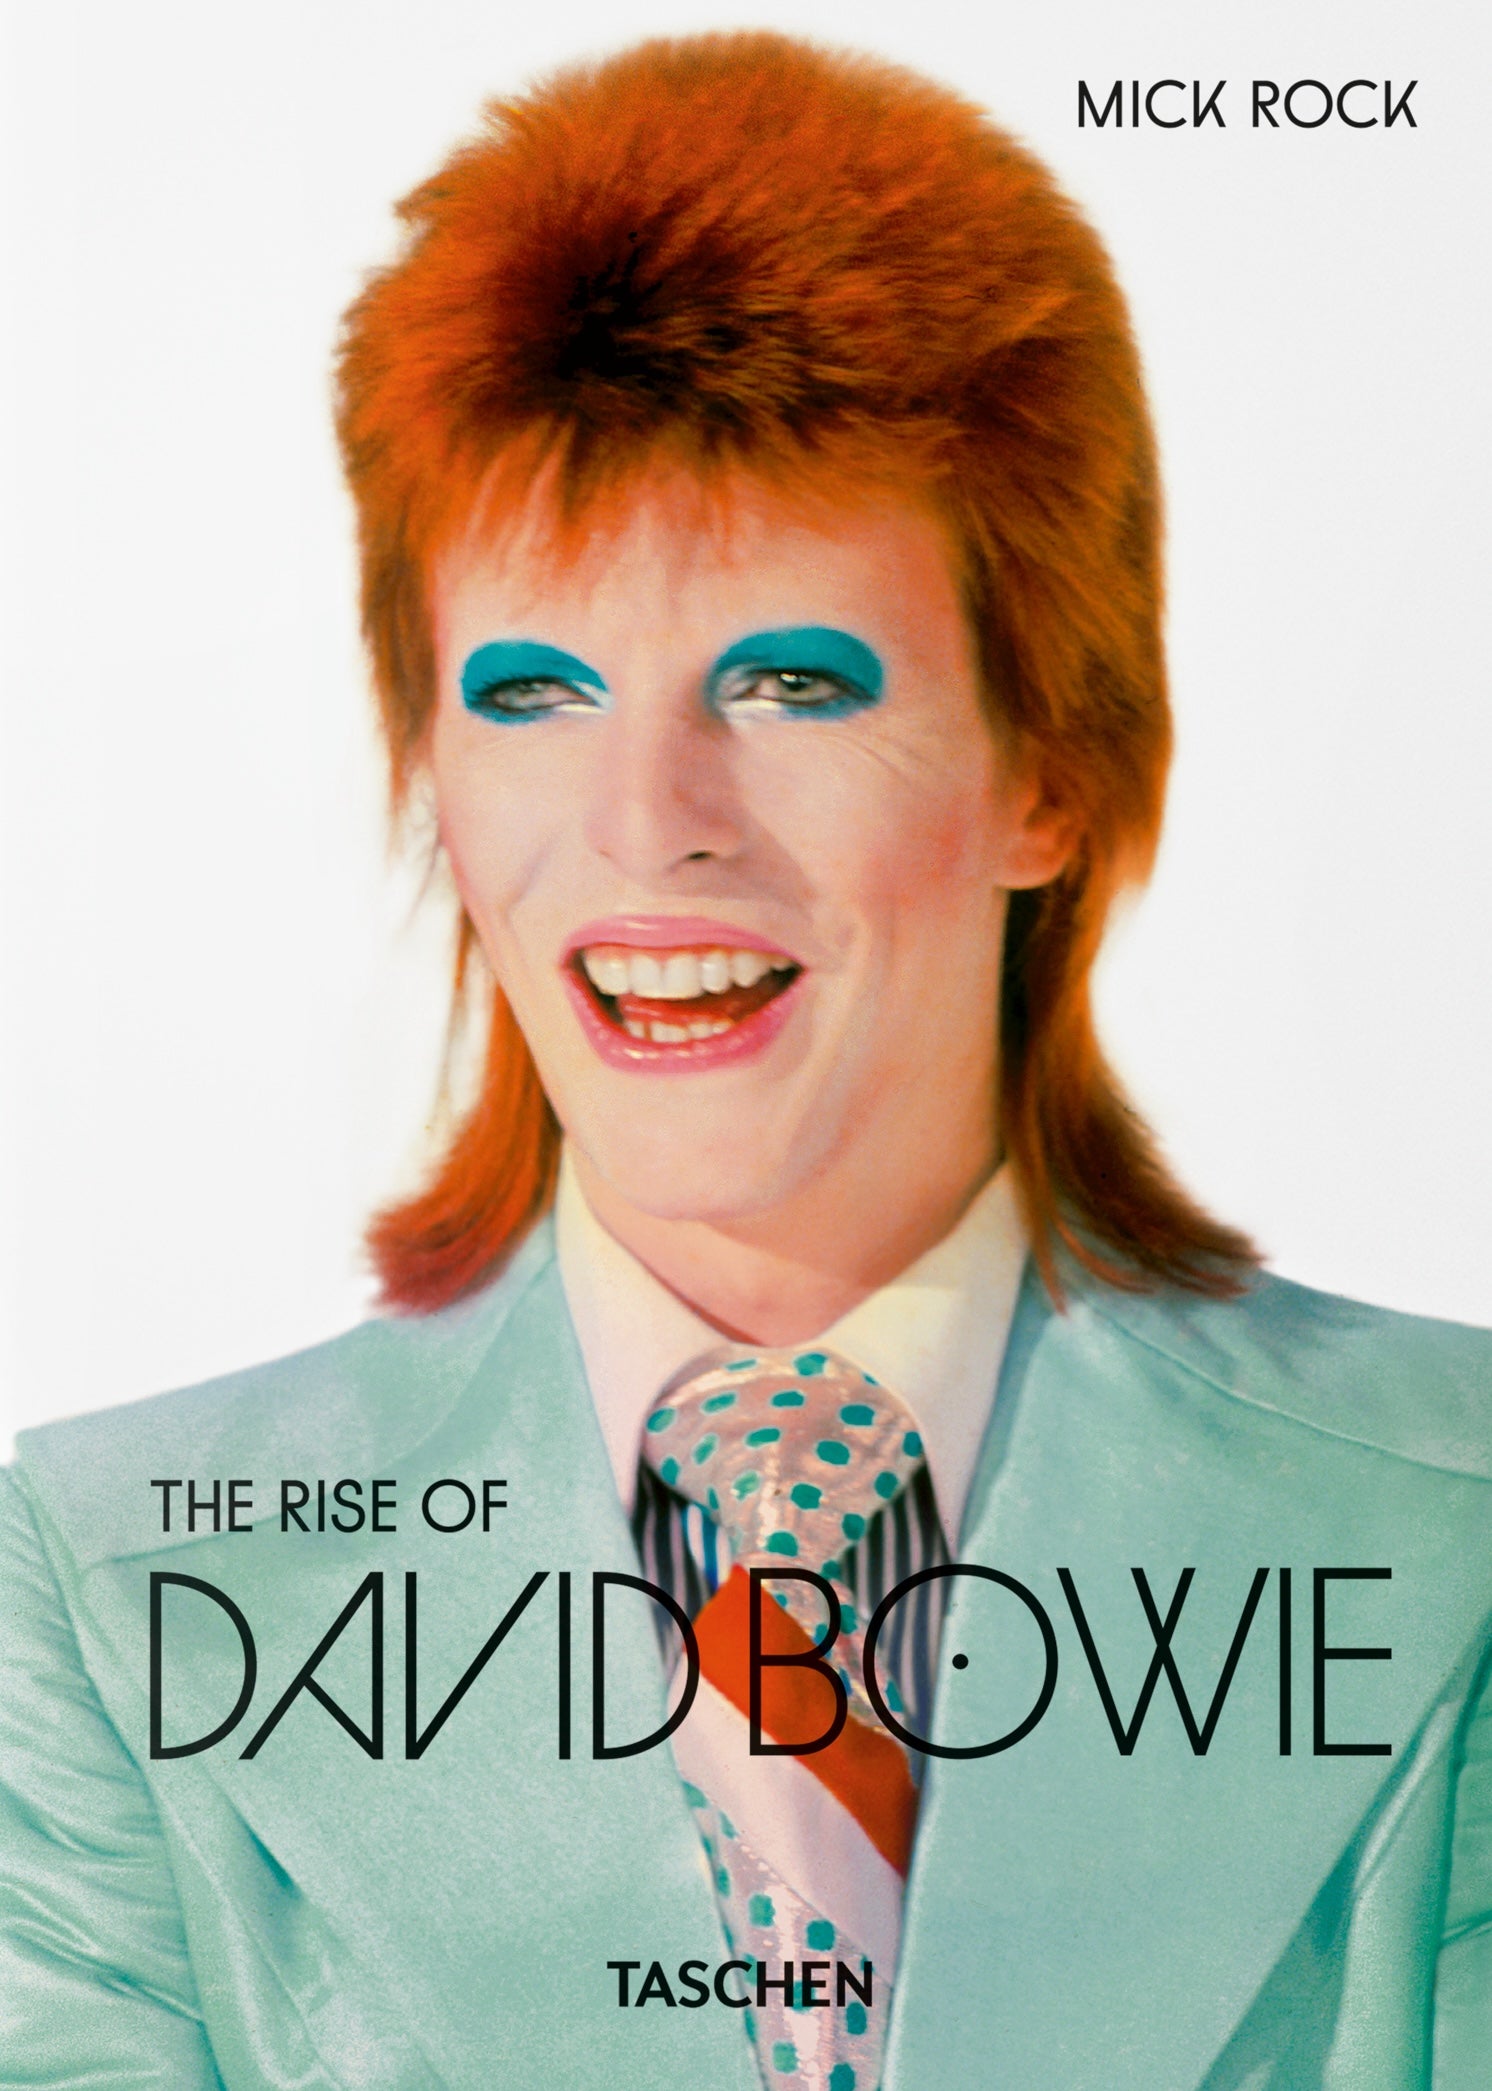 Mick Rock. The Rise of David Bowie. 1972–1973. Small